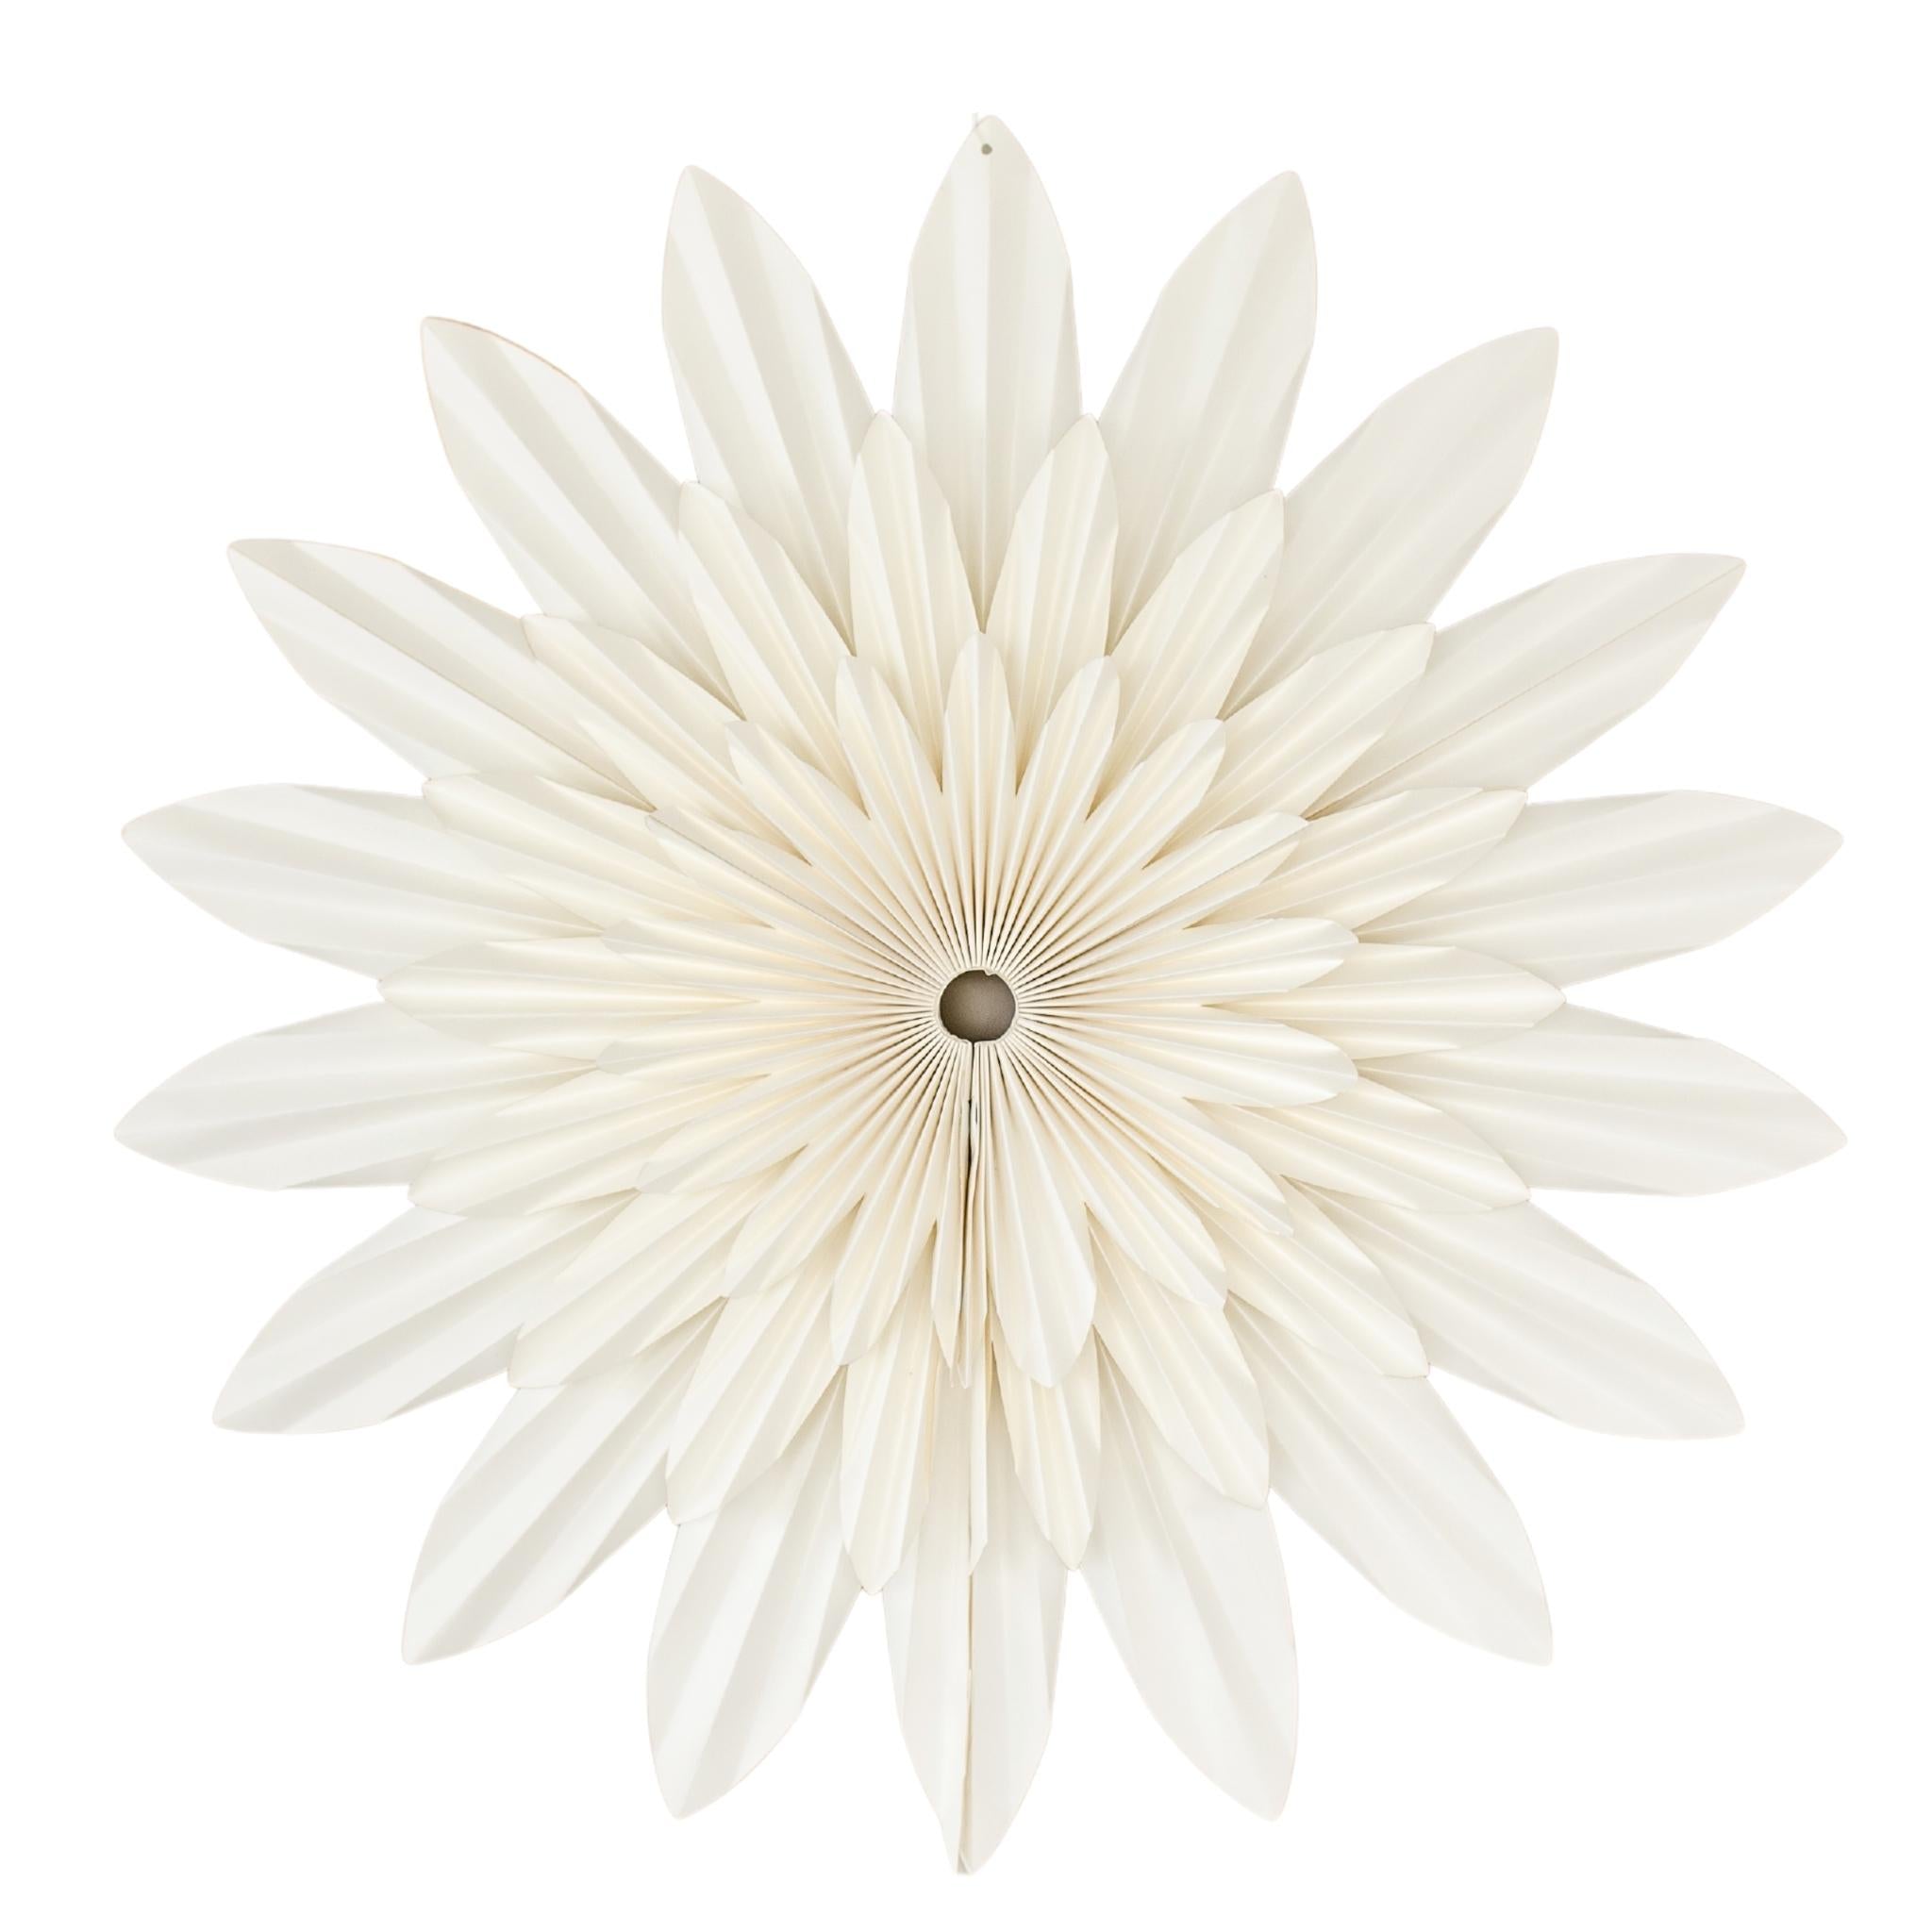 70cm Off-white paper flower wall hanging against a white background